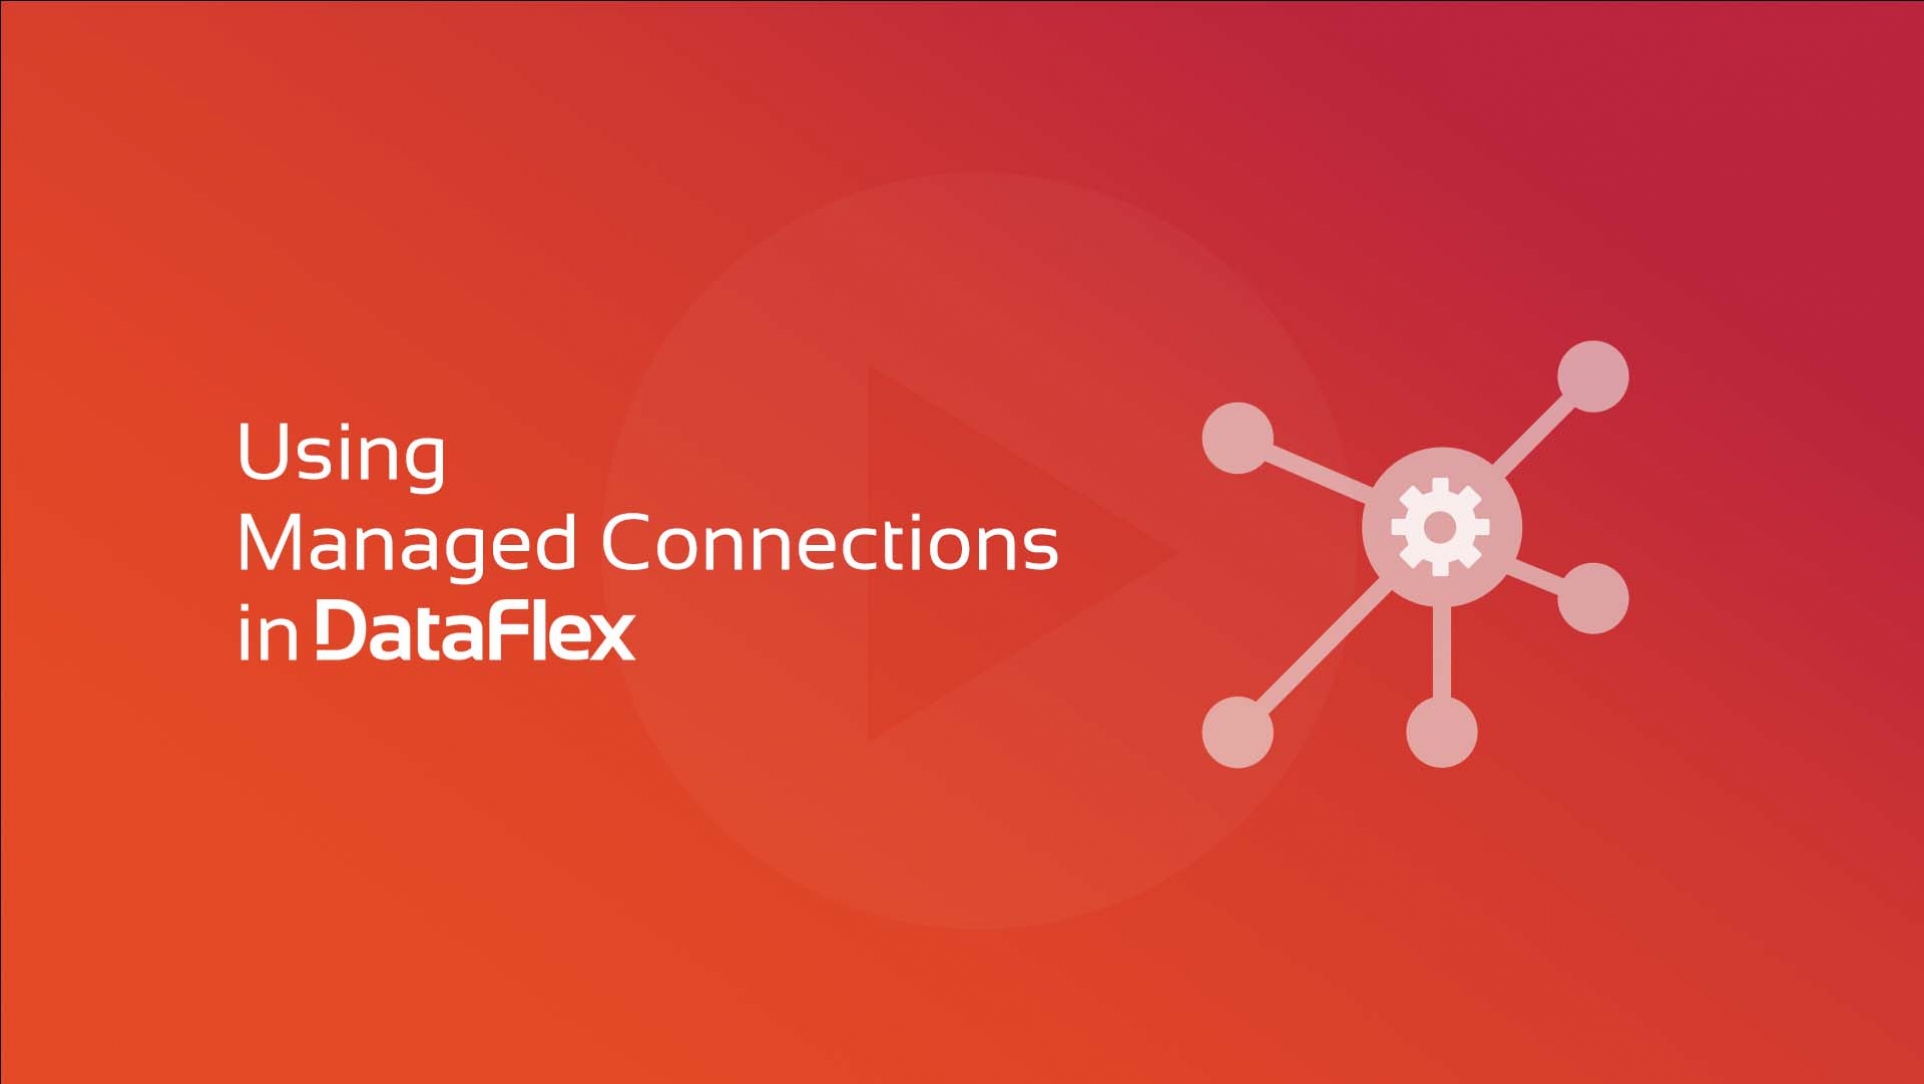 Using Managed Connections in DataFlex